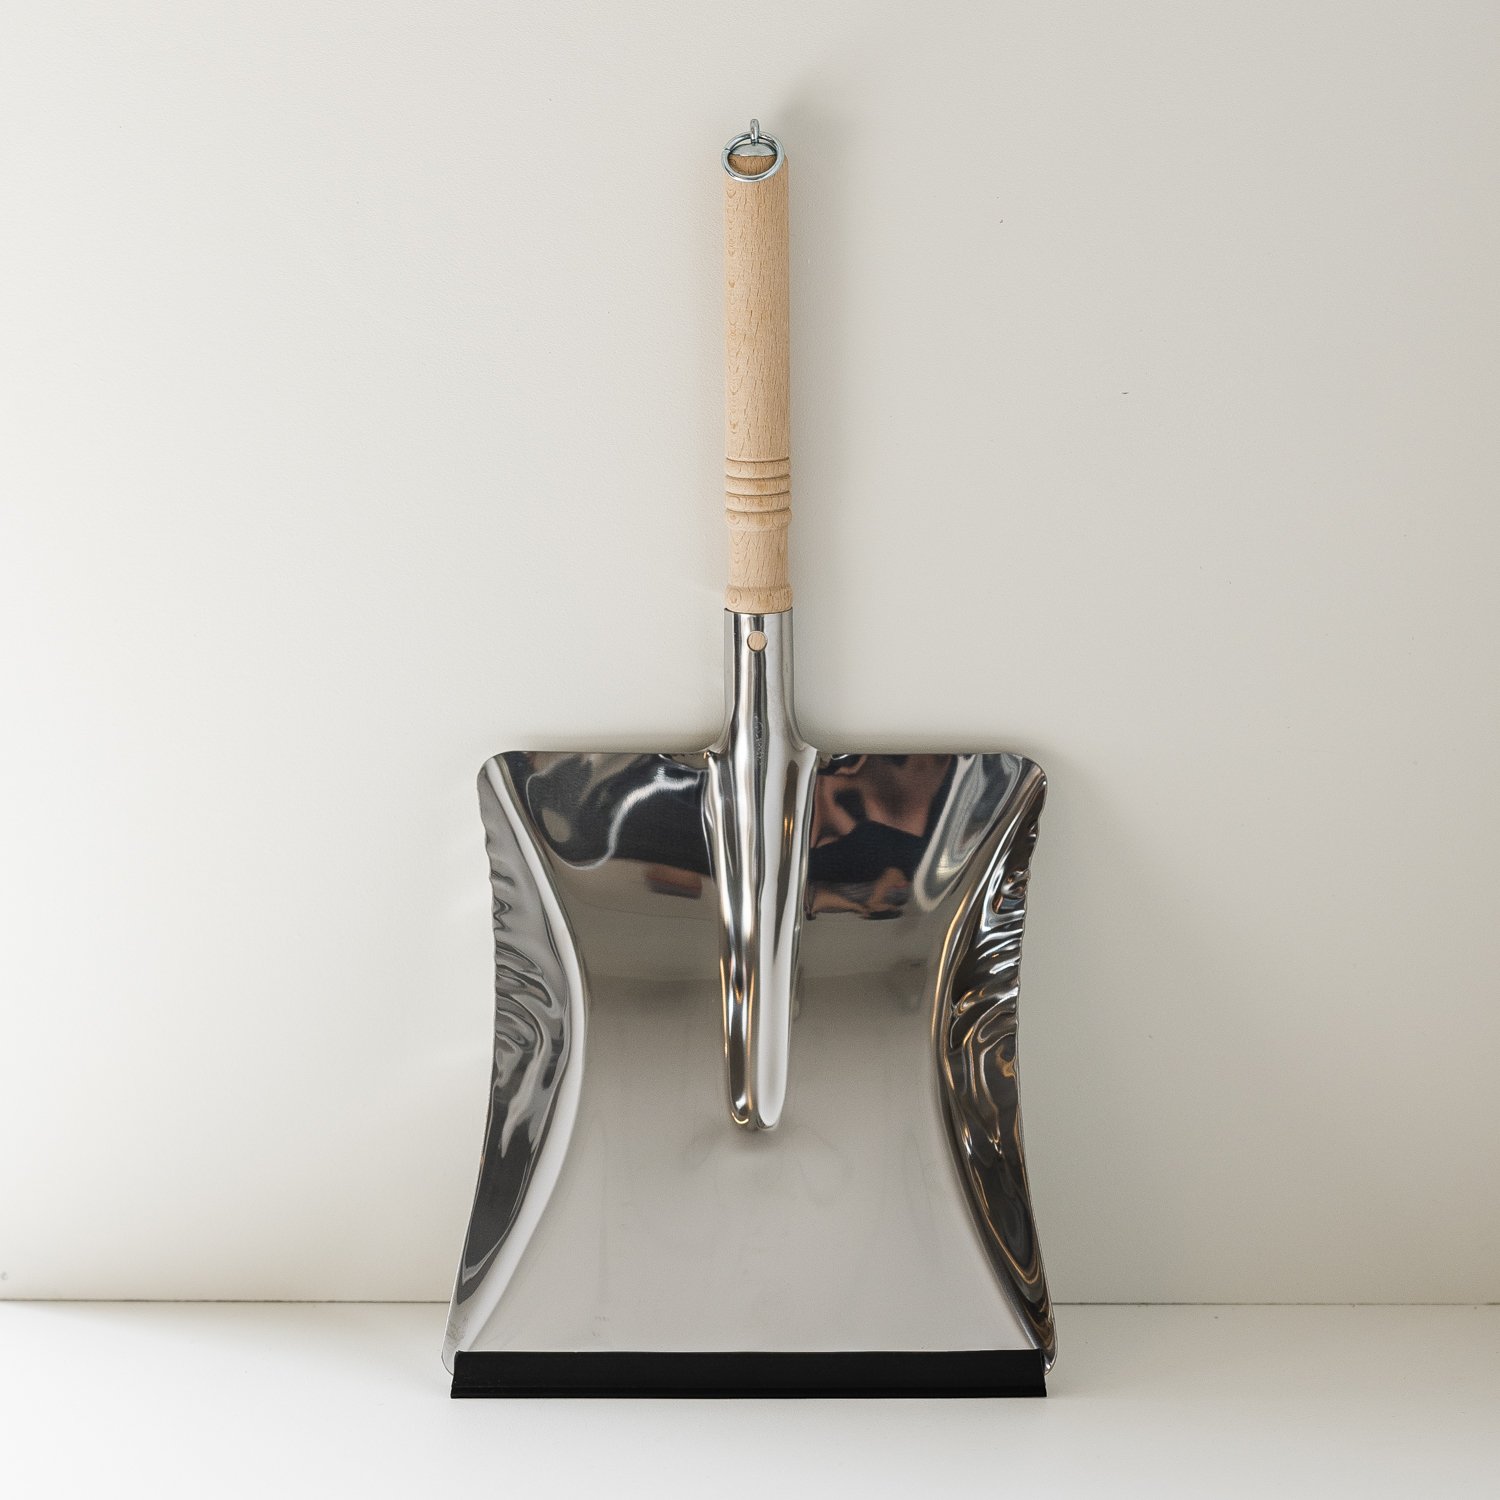 Stainless Dustpan